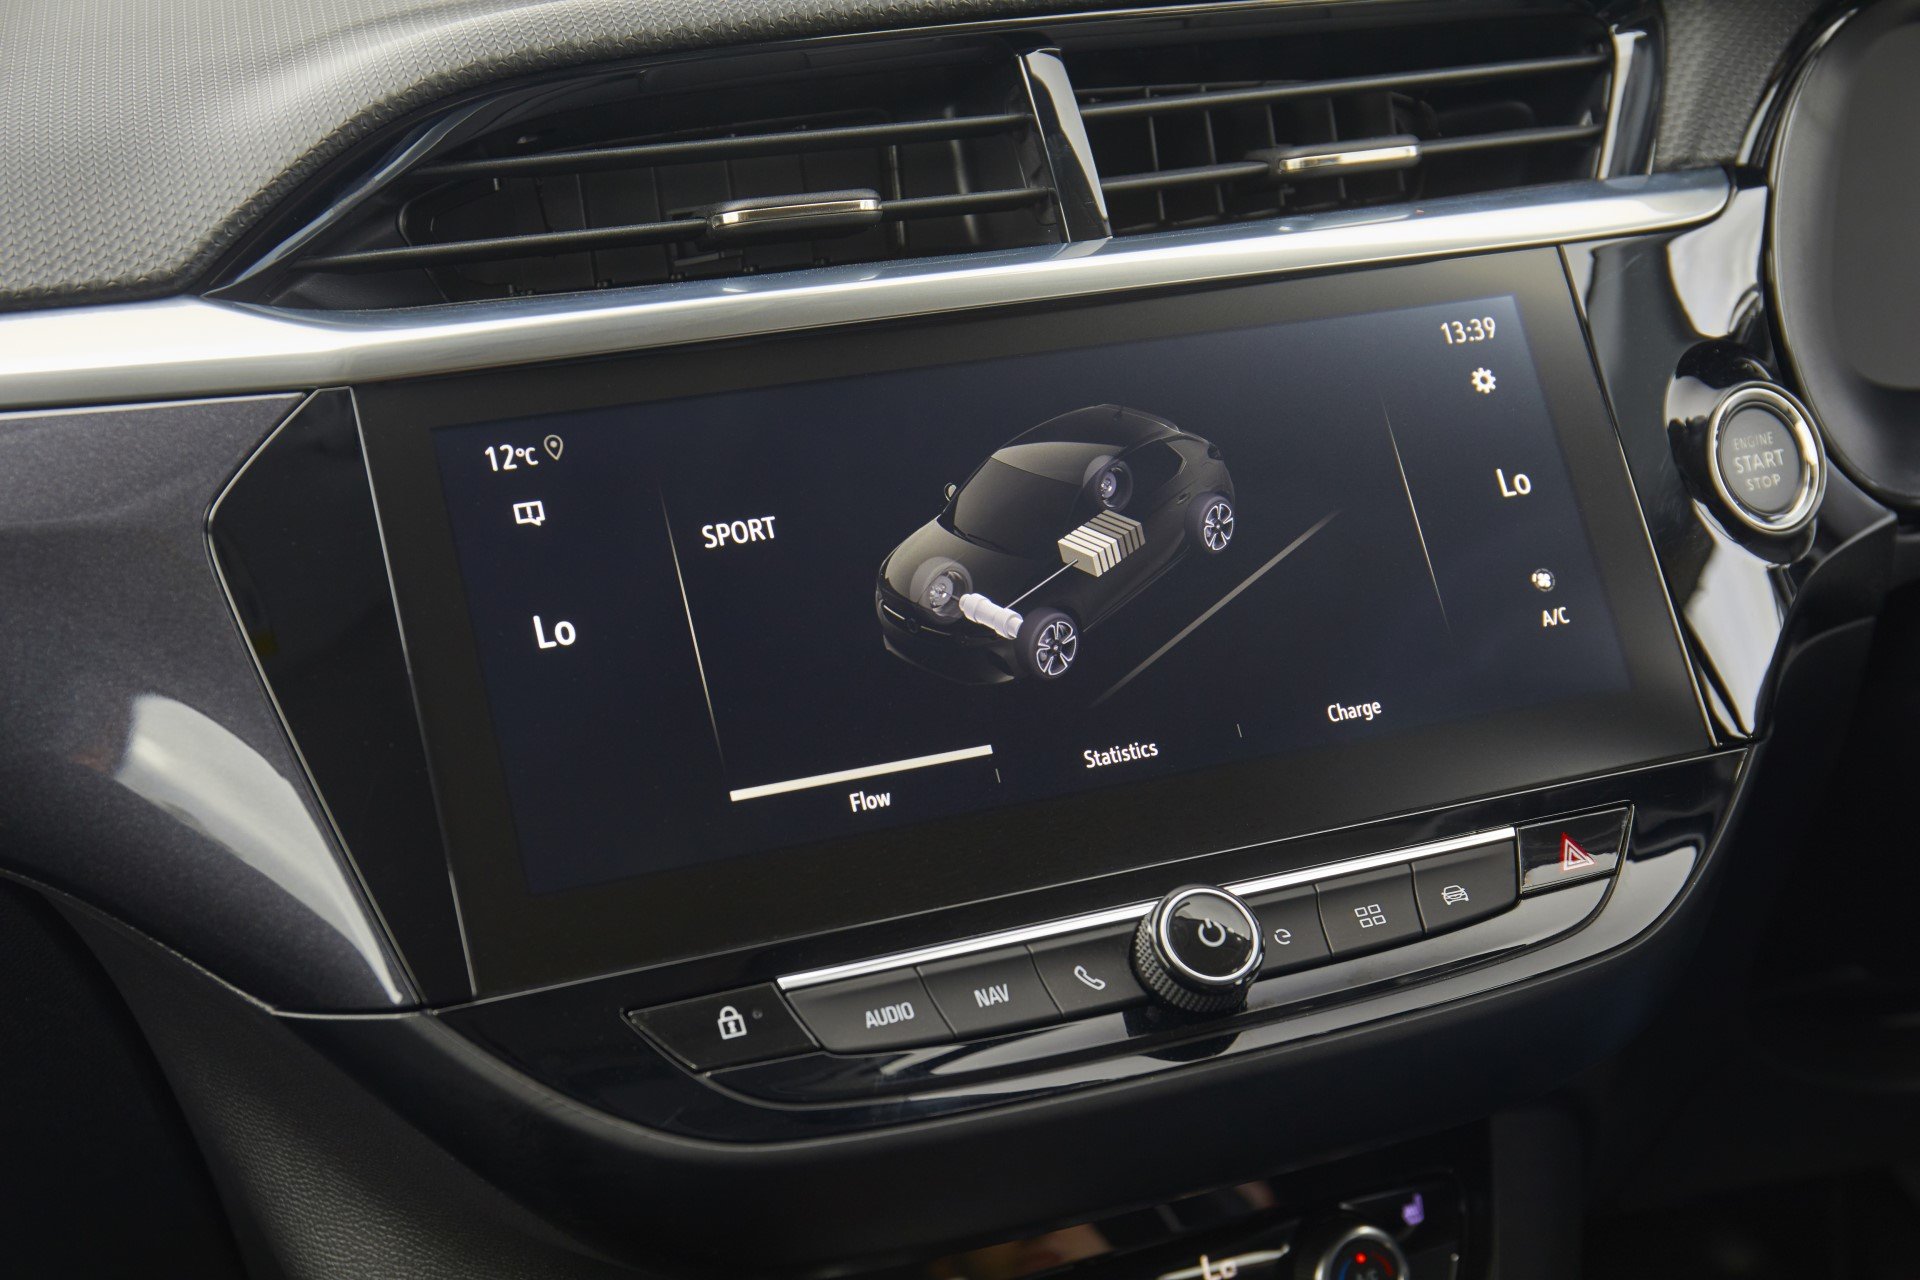 Image of the Vauxhall Corsa E's In Car Entertainment System and touchscreen control panel